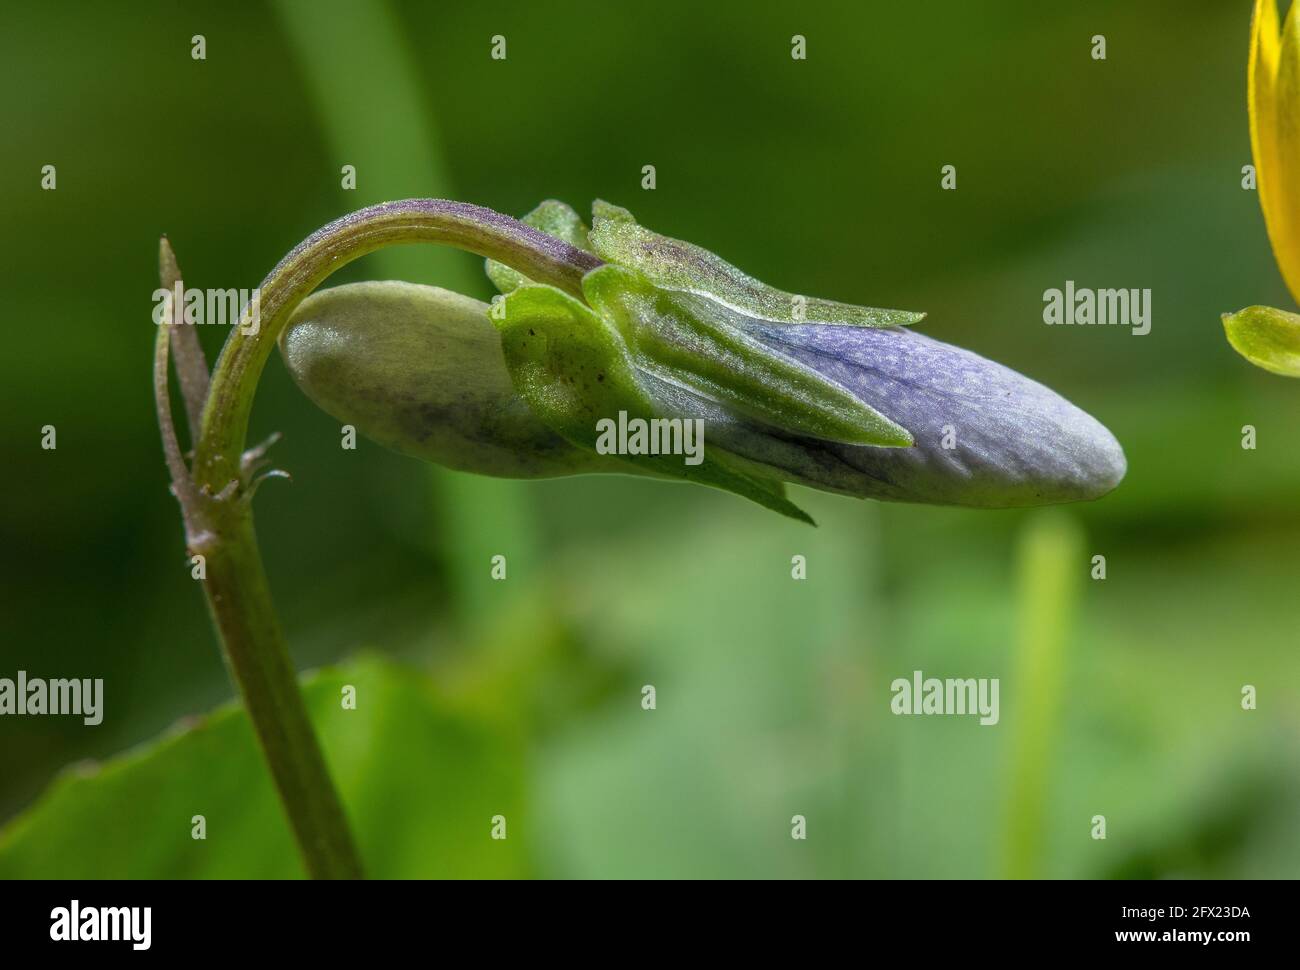 Common dog-violet, Viola riviniana bud showing spur, calyx and appendages. Stock Photo